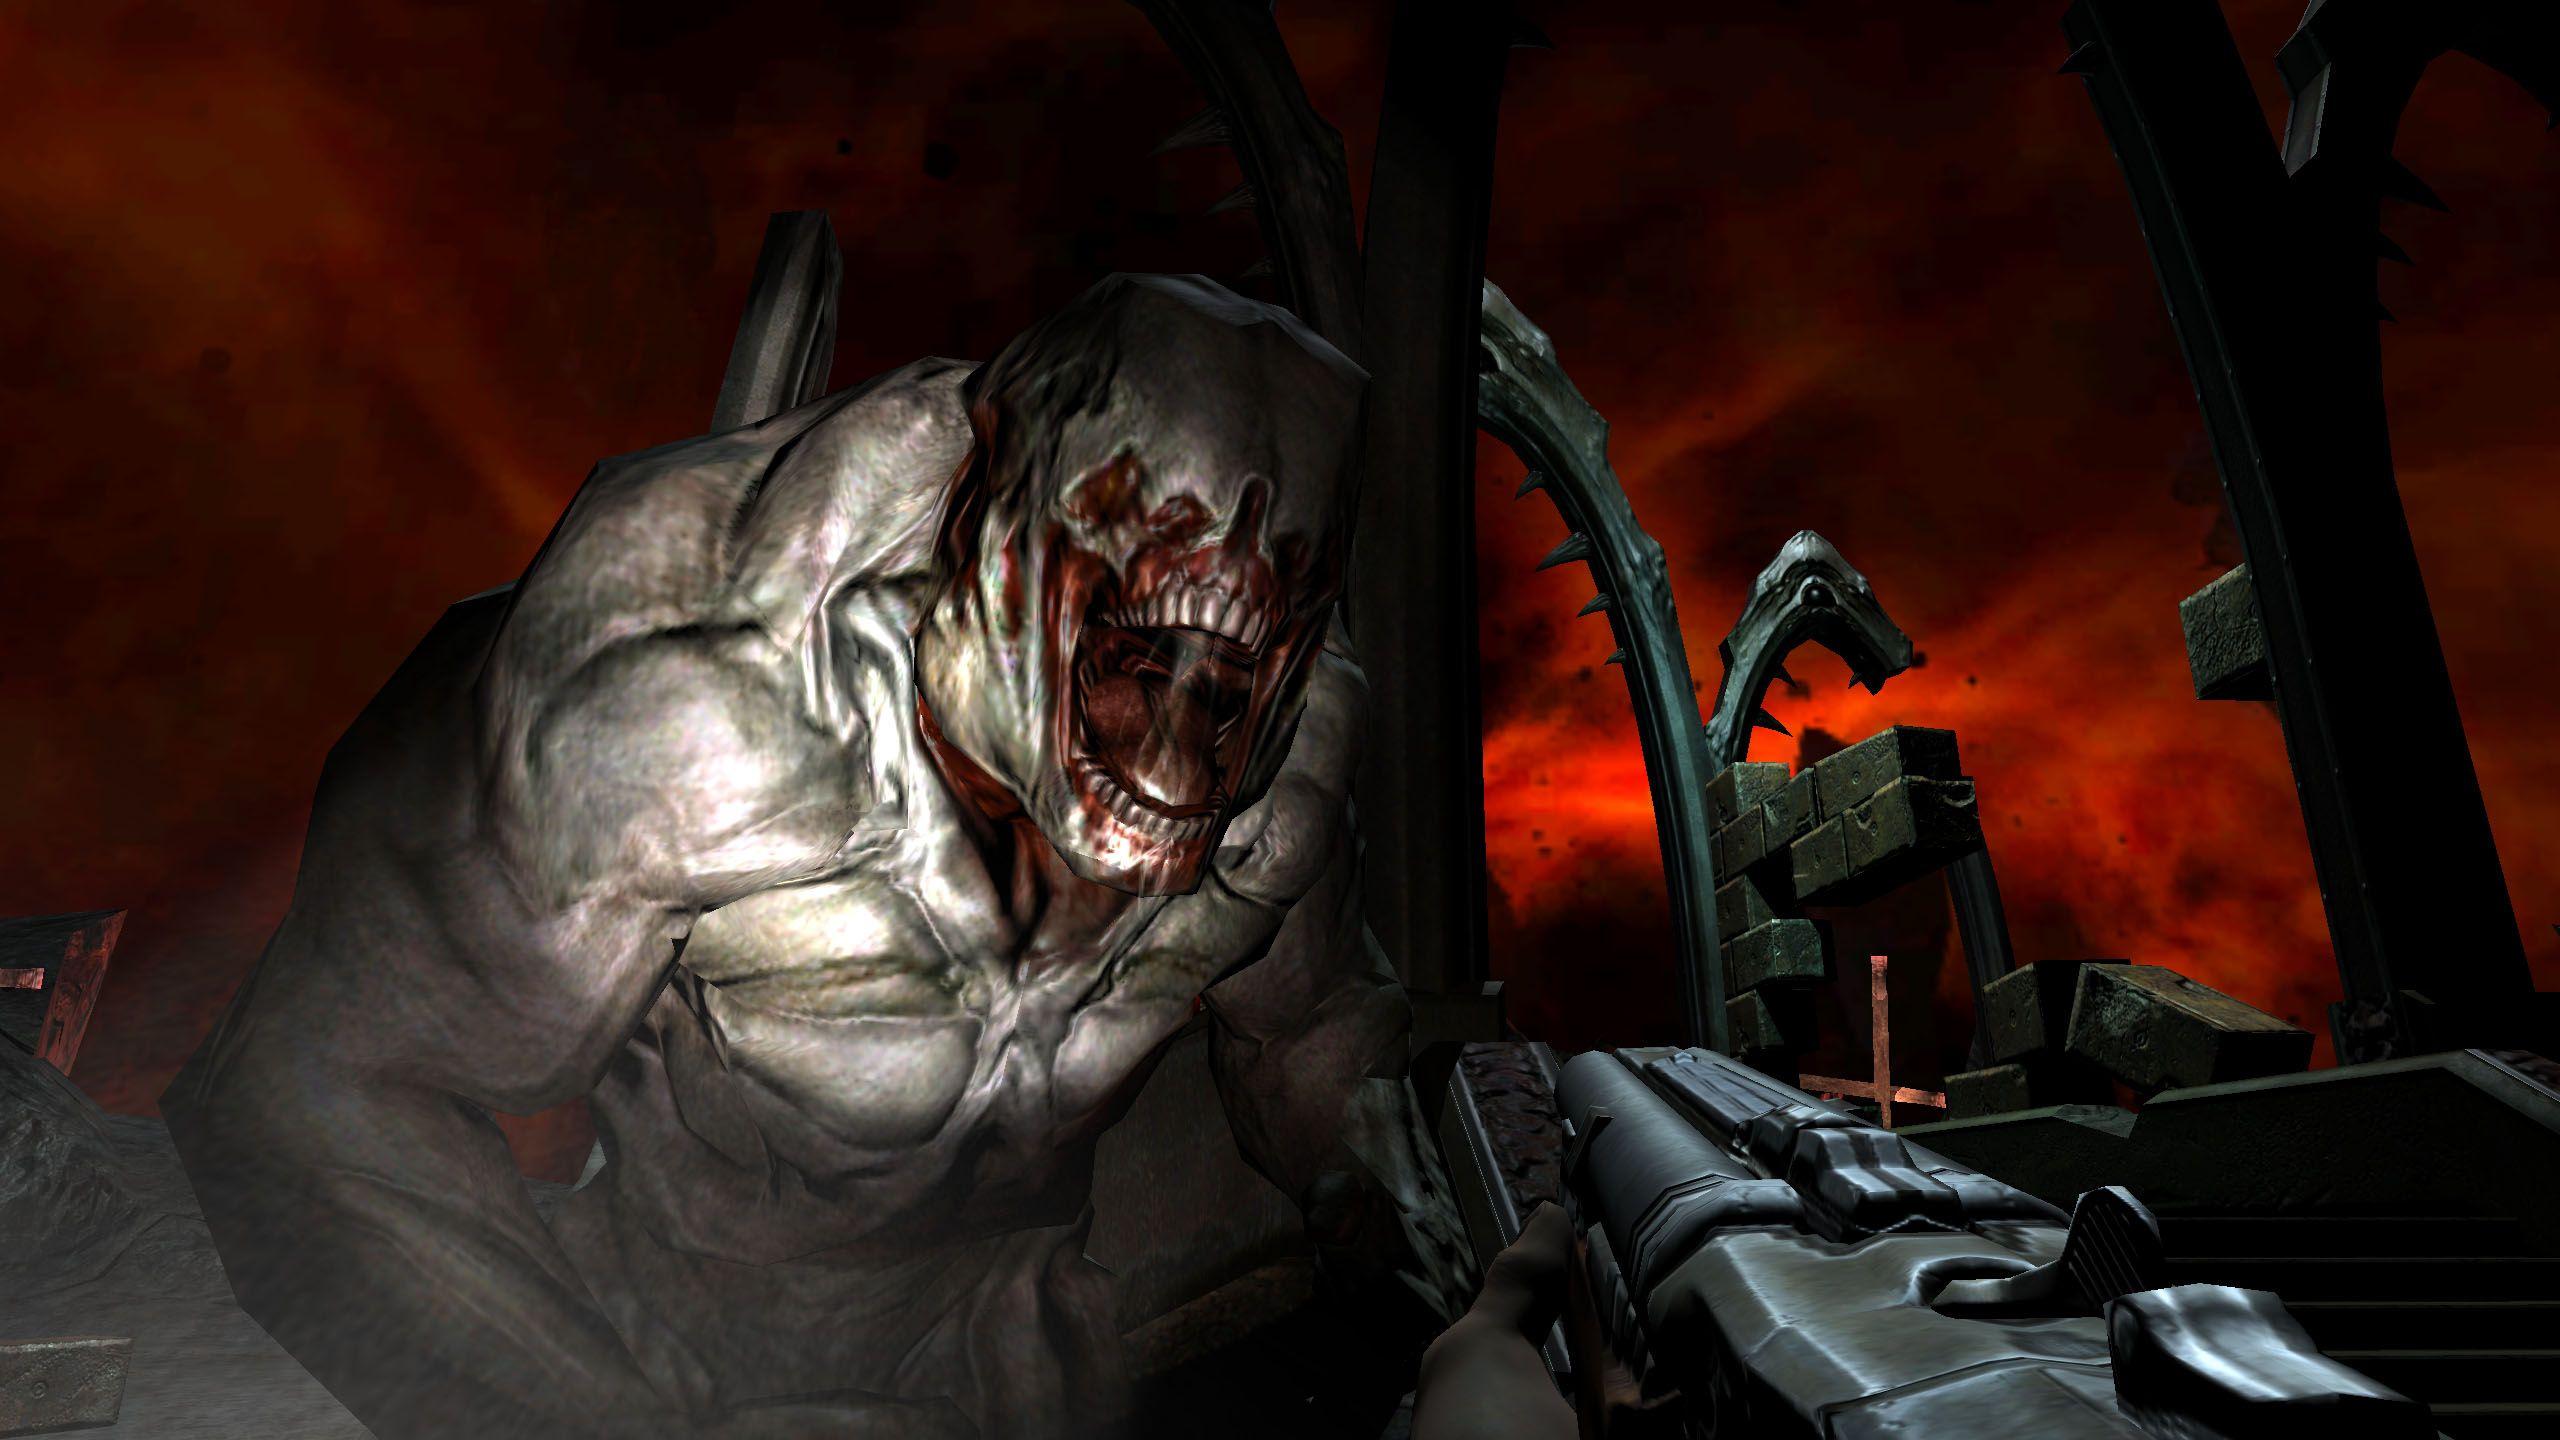 You Can Now Play DOOM 3 In VR On Vive With Motion Controllers